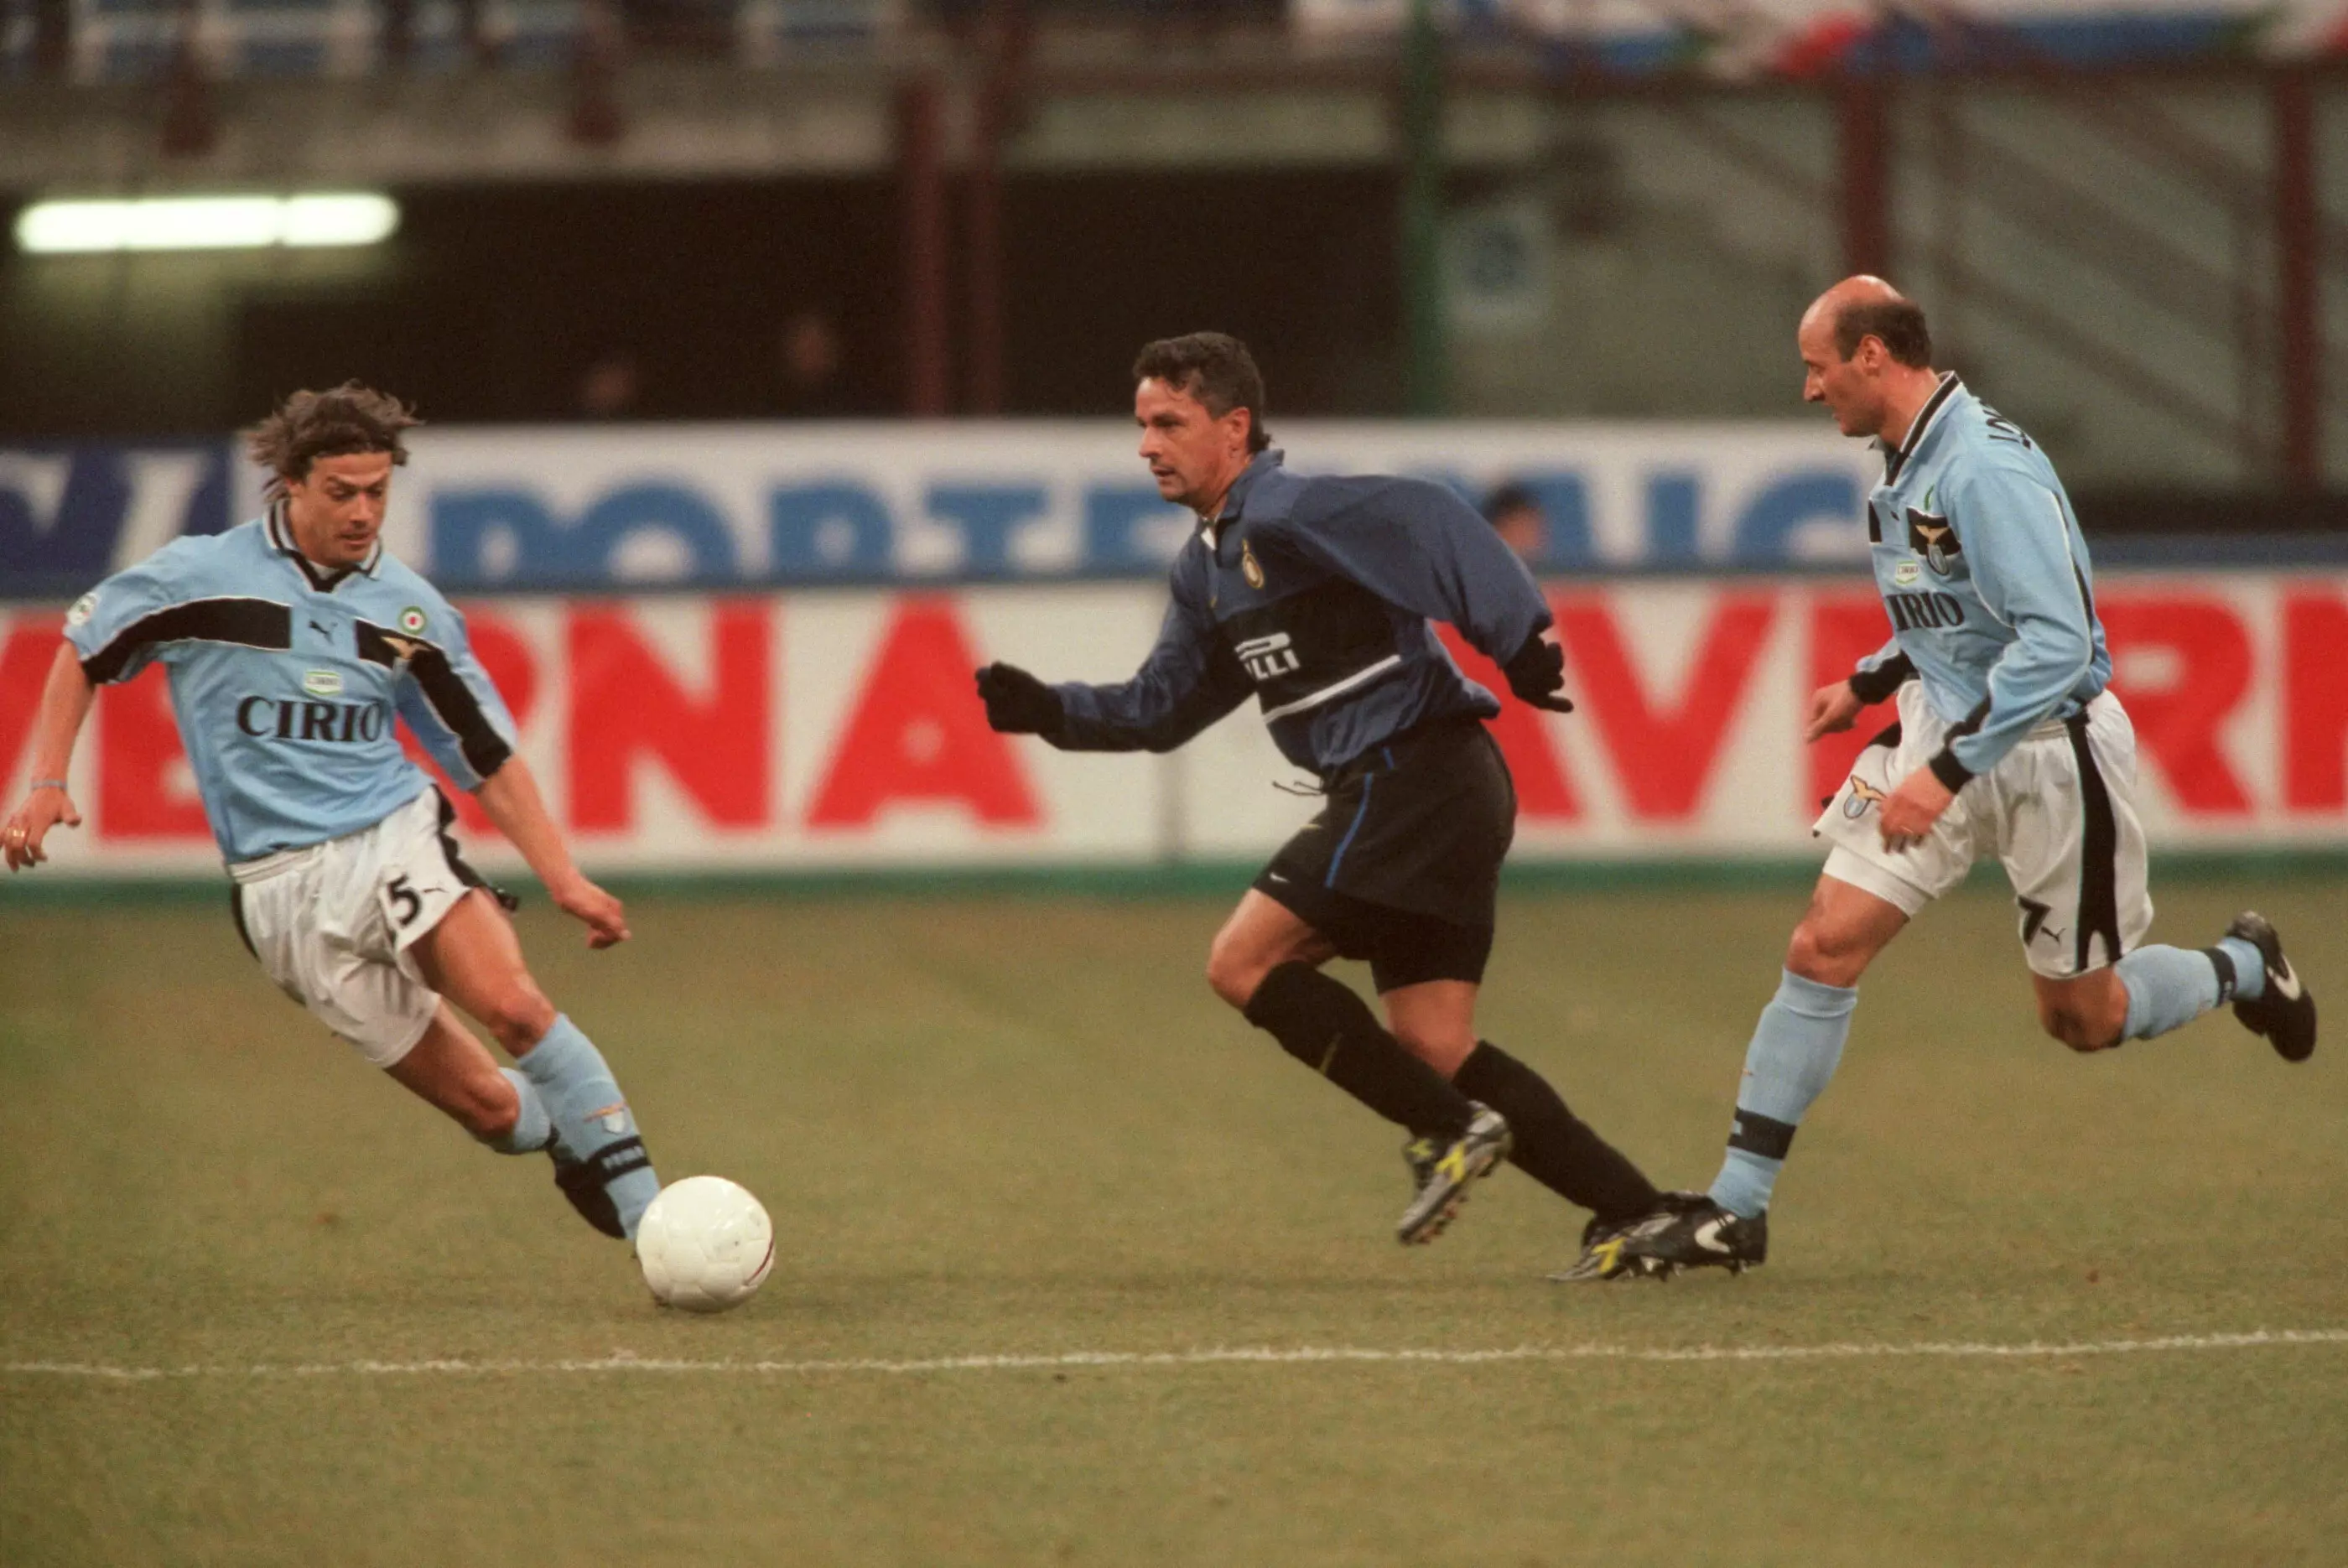 Roberto Baggio, another icon of 1990's Serie A, also put on Inter's famous blue and black. Image: PA Images